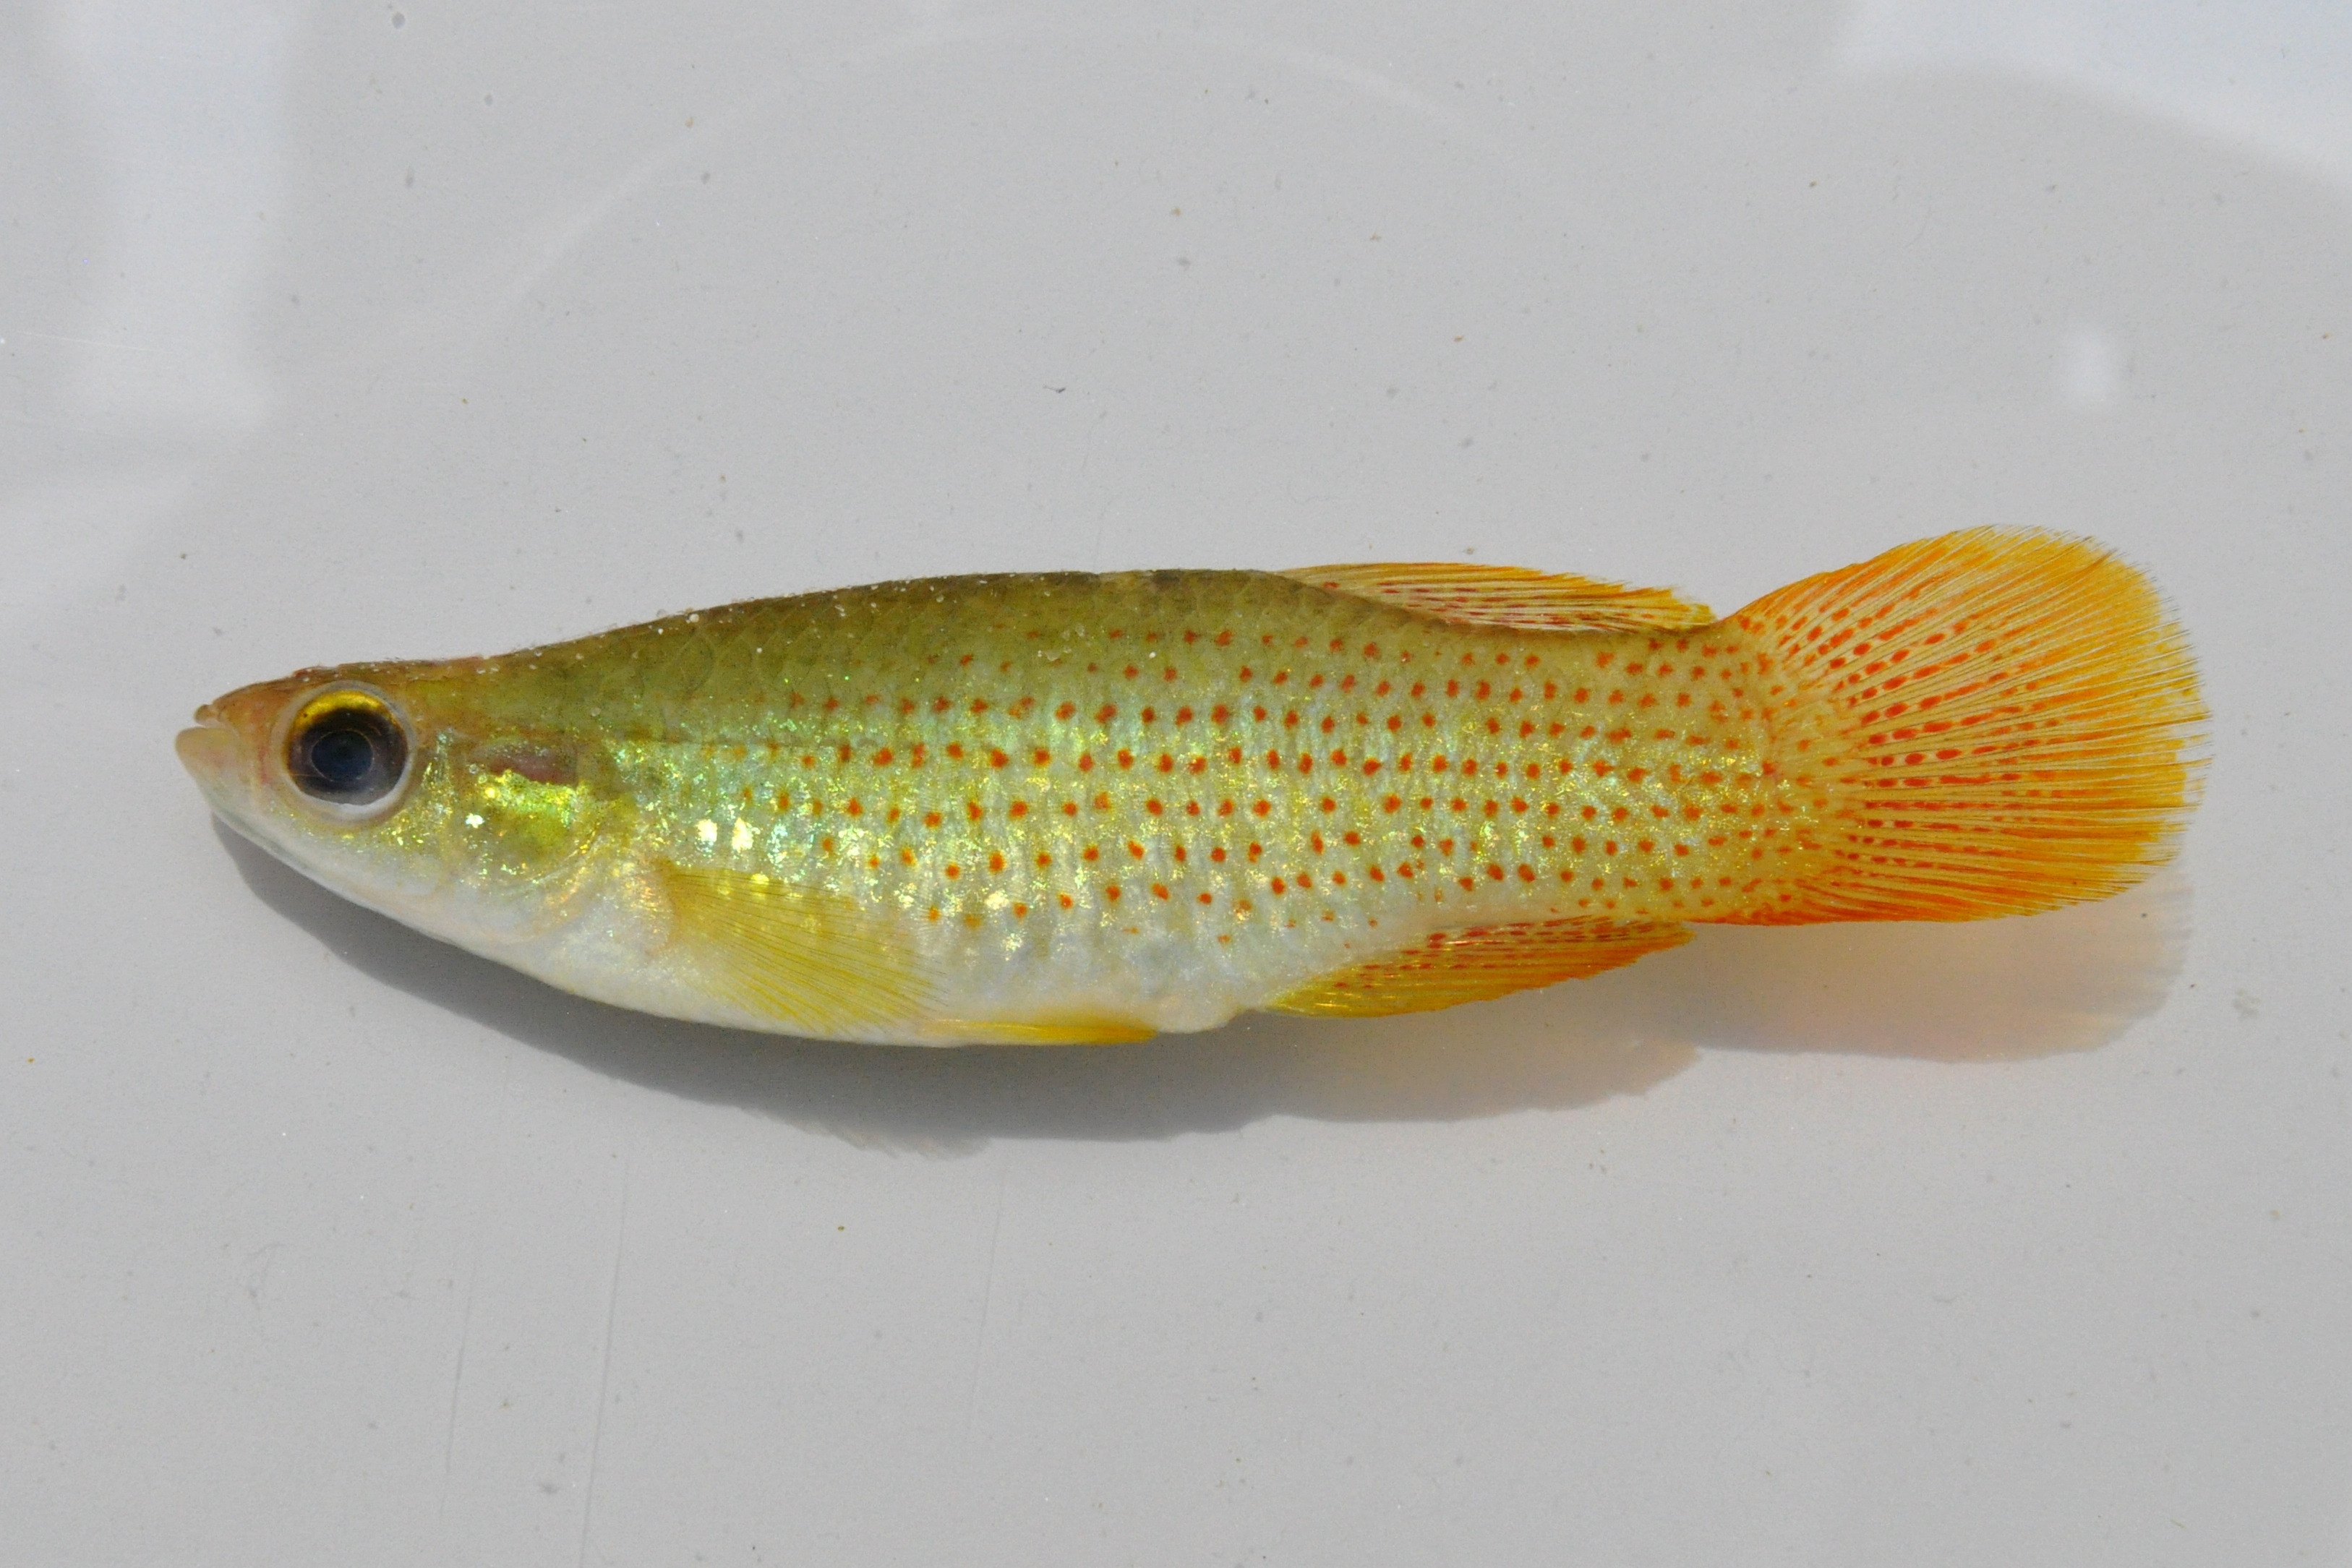 male golden topminnow from Ocala national forest FL 4OCT09 by BZ